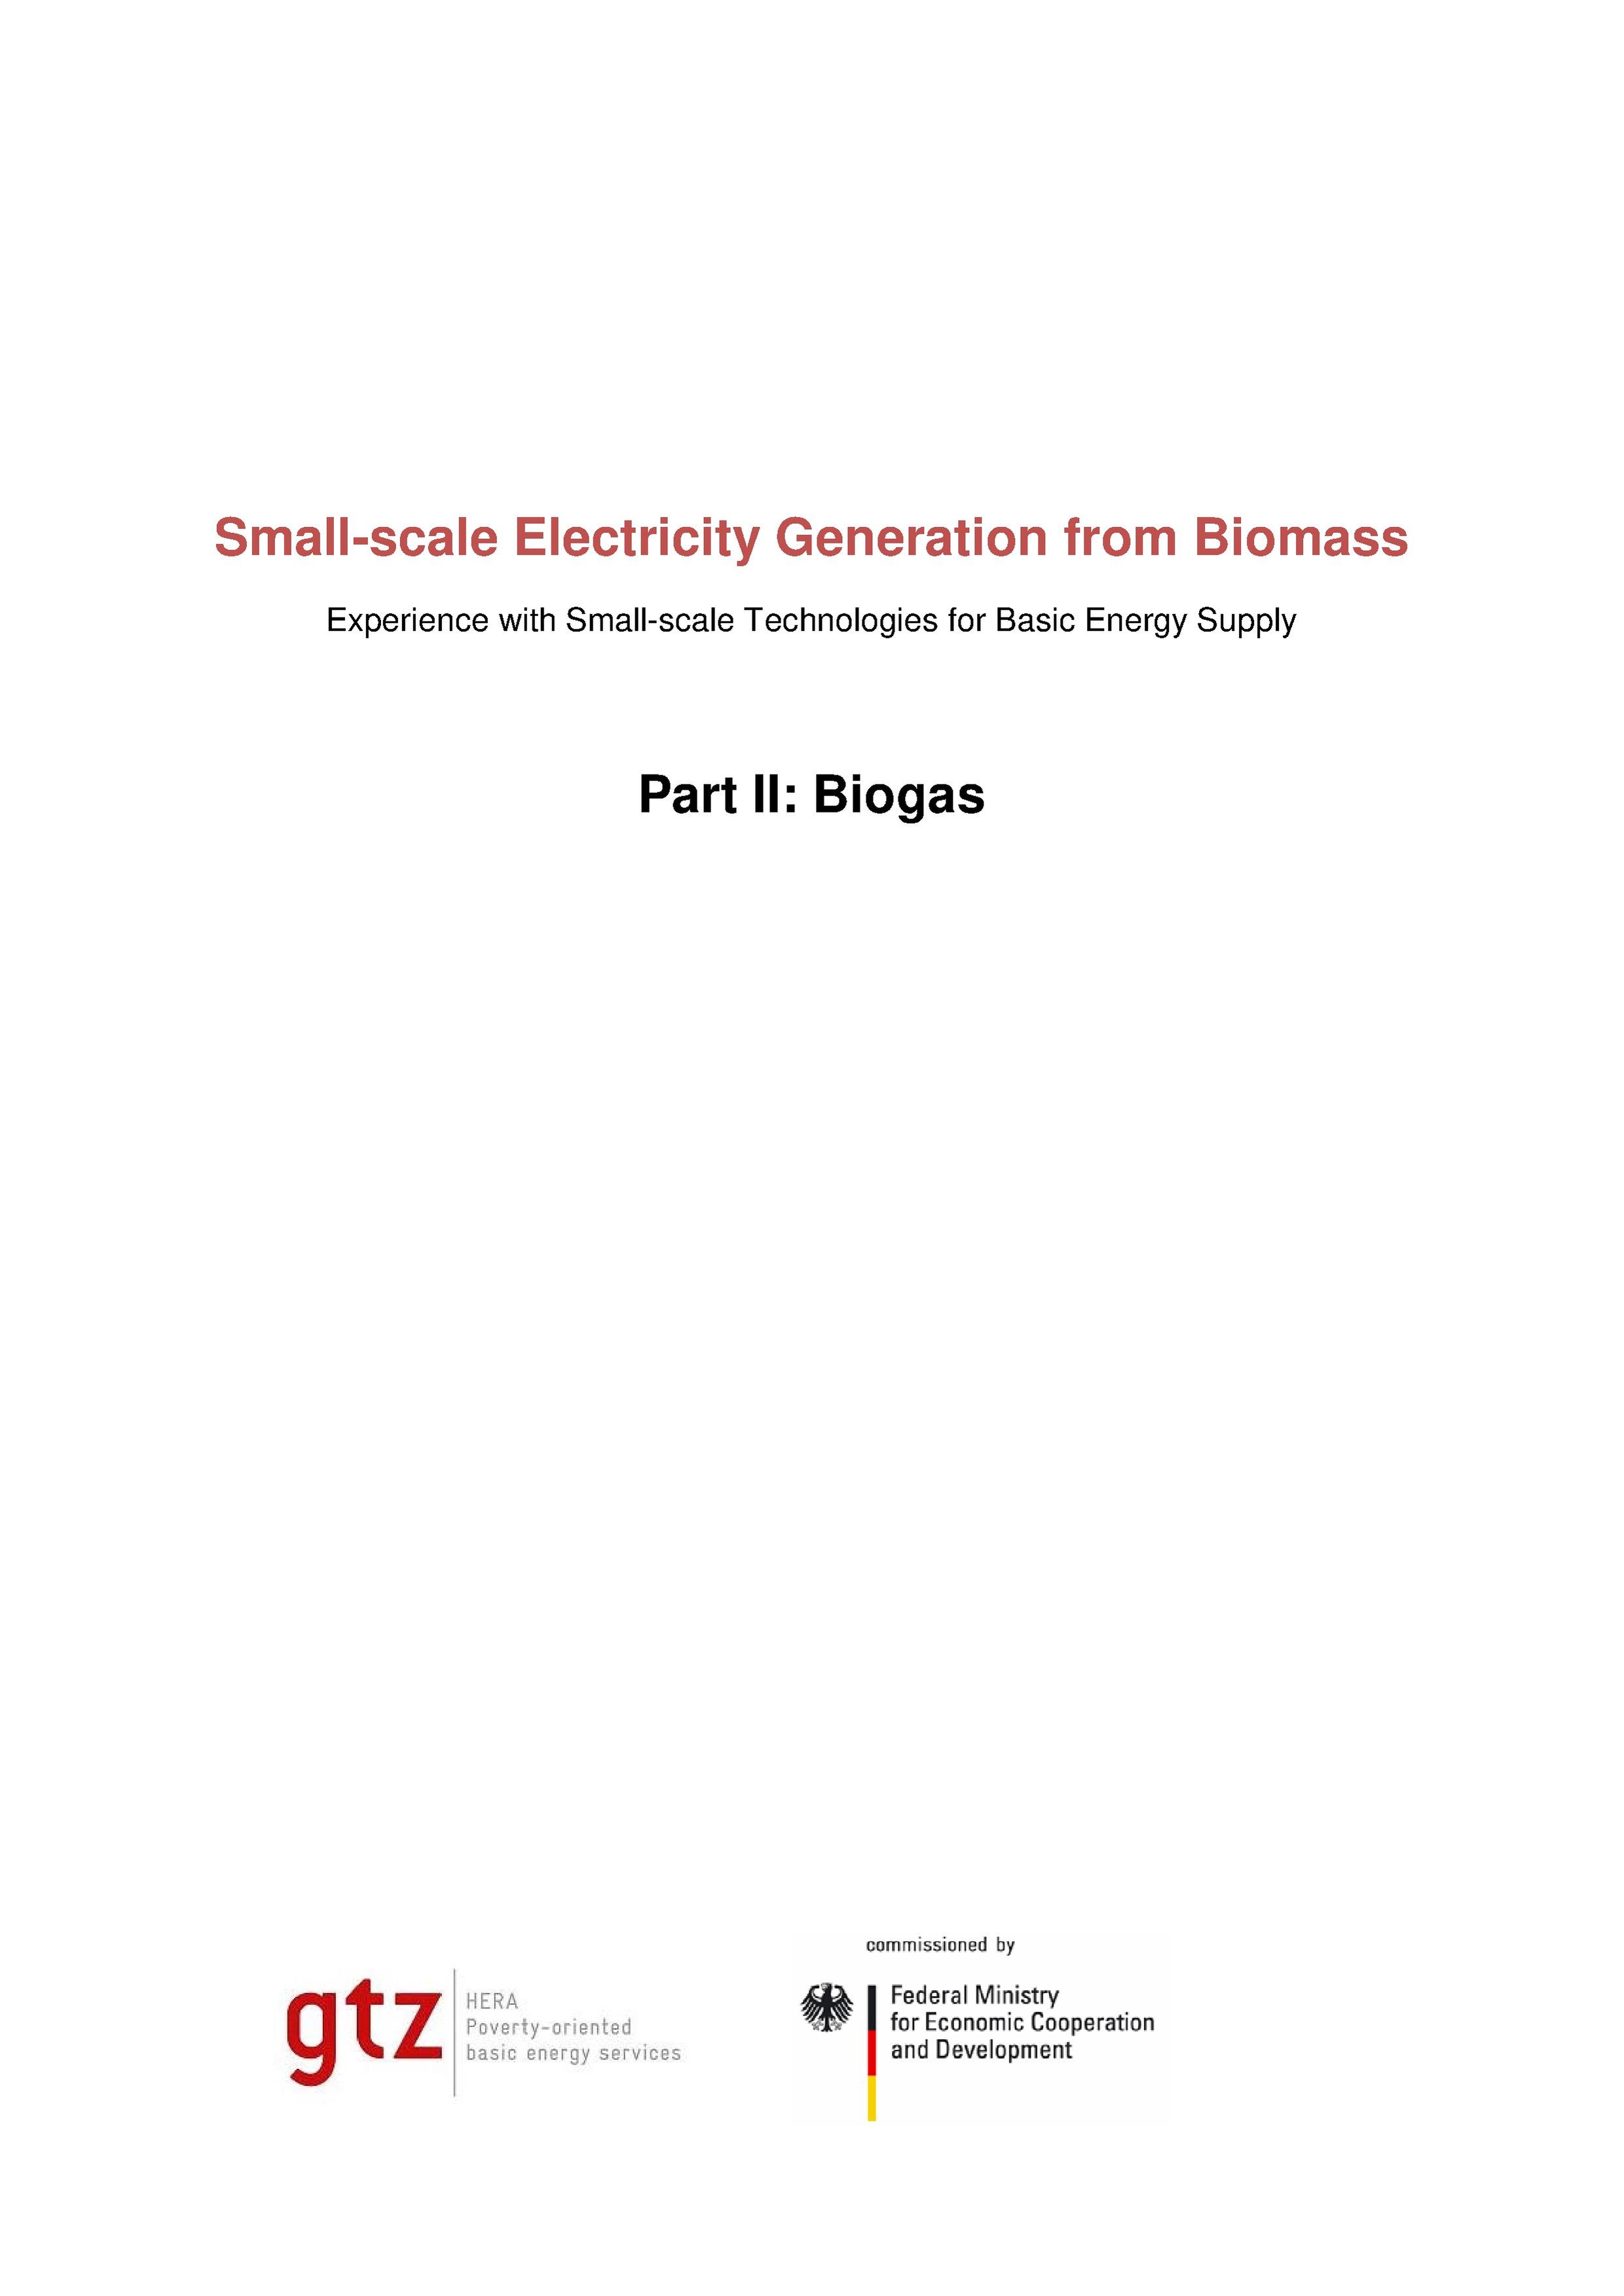 File:Small-scale Electricity Generation From Biomass Part-2.pdf